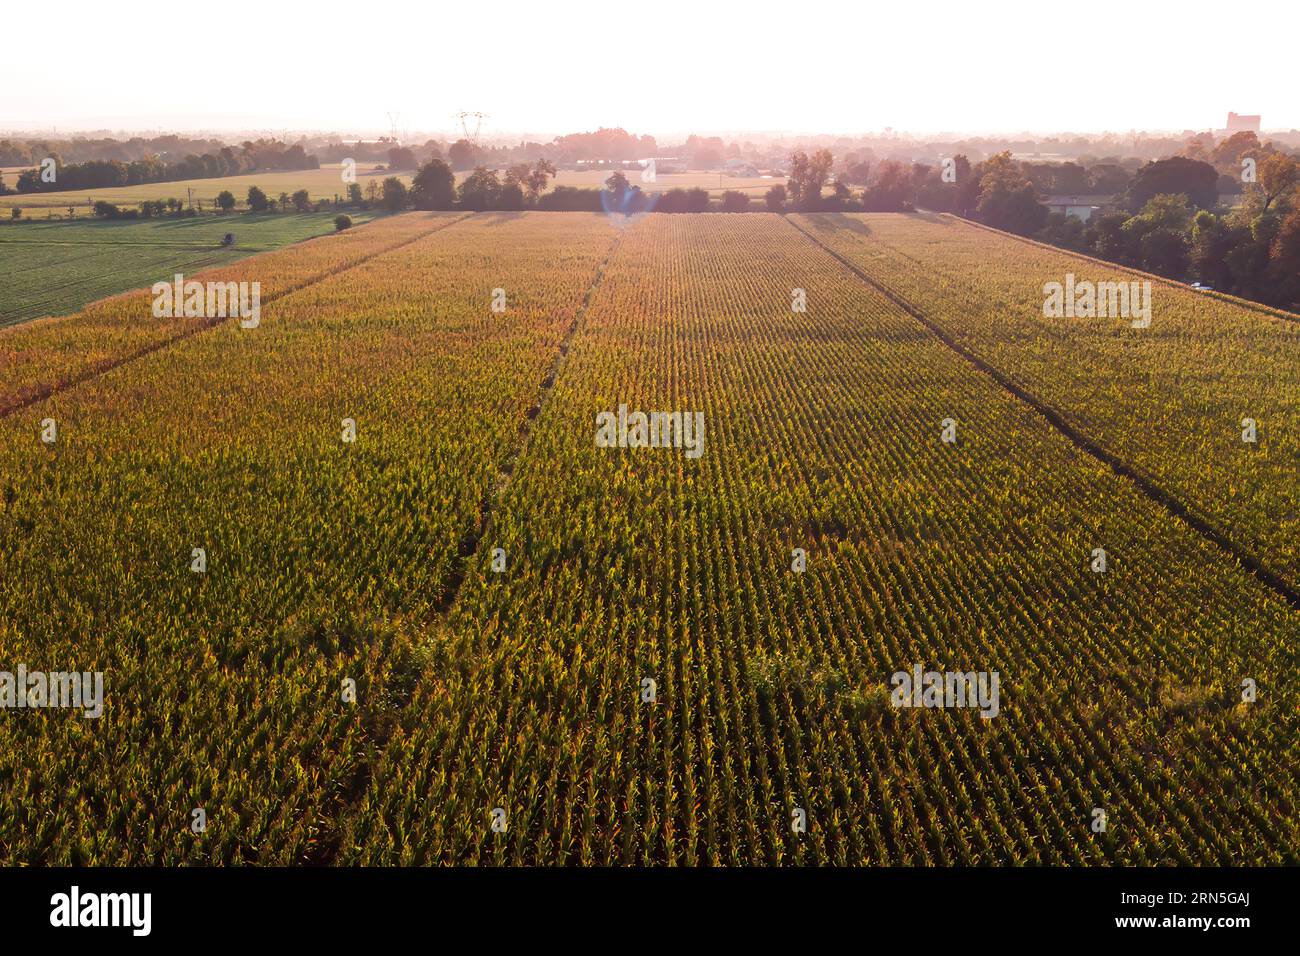 Aerial view of cornfields in northern Italy Veneto region at sunrise. Landscape of cultivated fields in the italian farmlands countryside Stock Photo